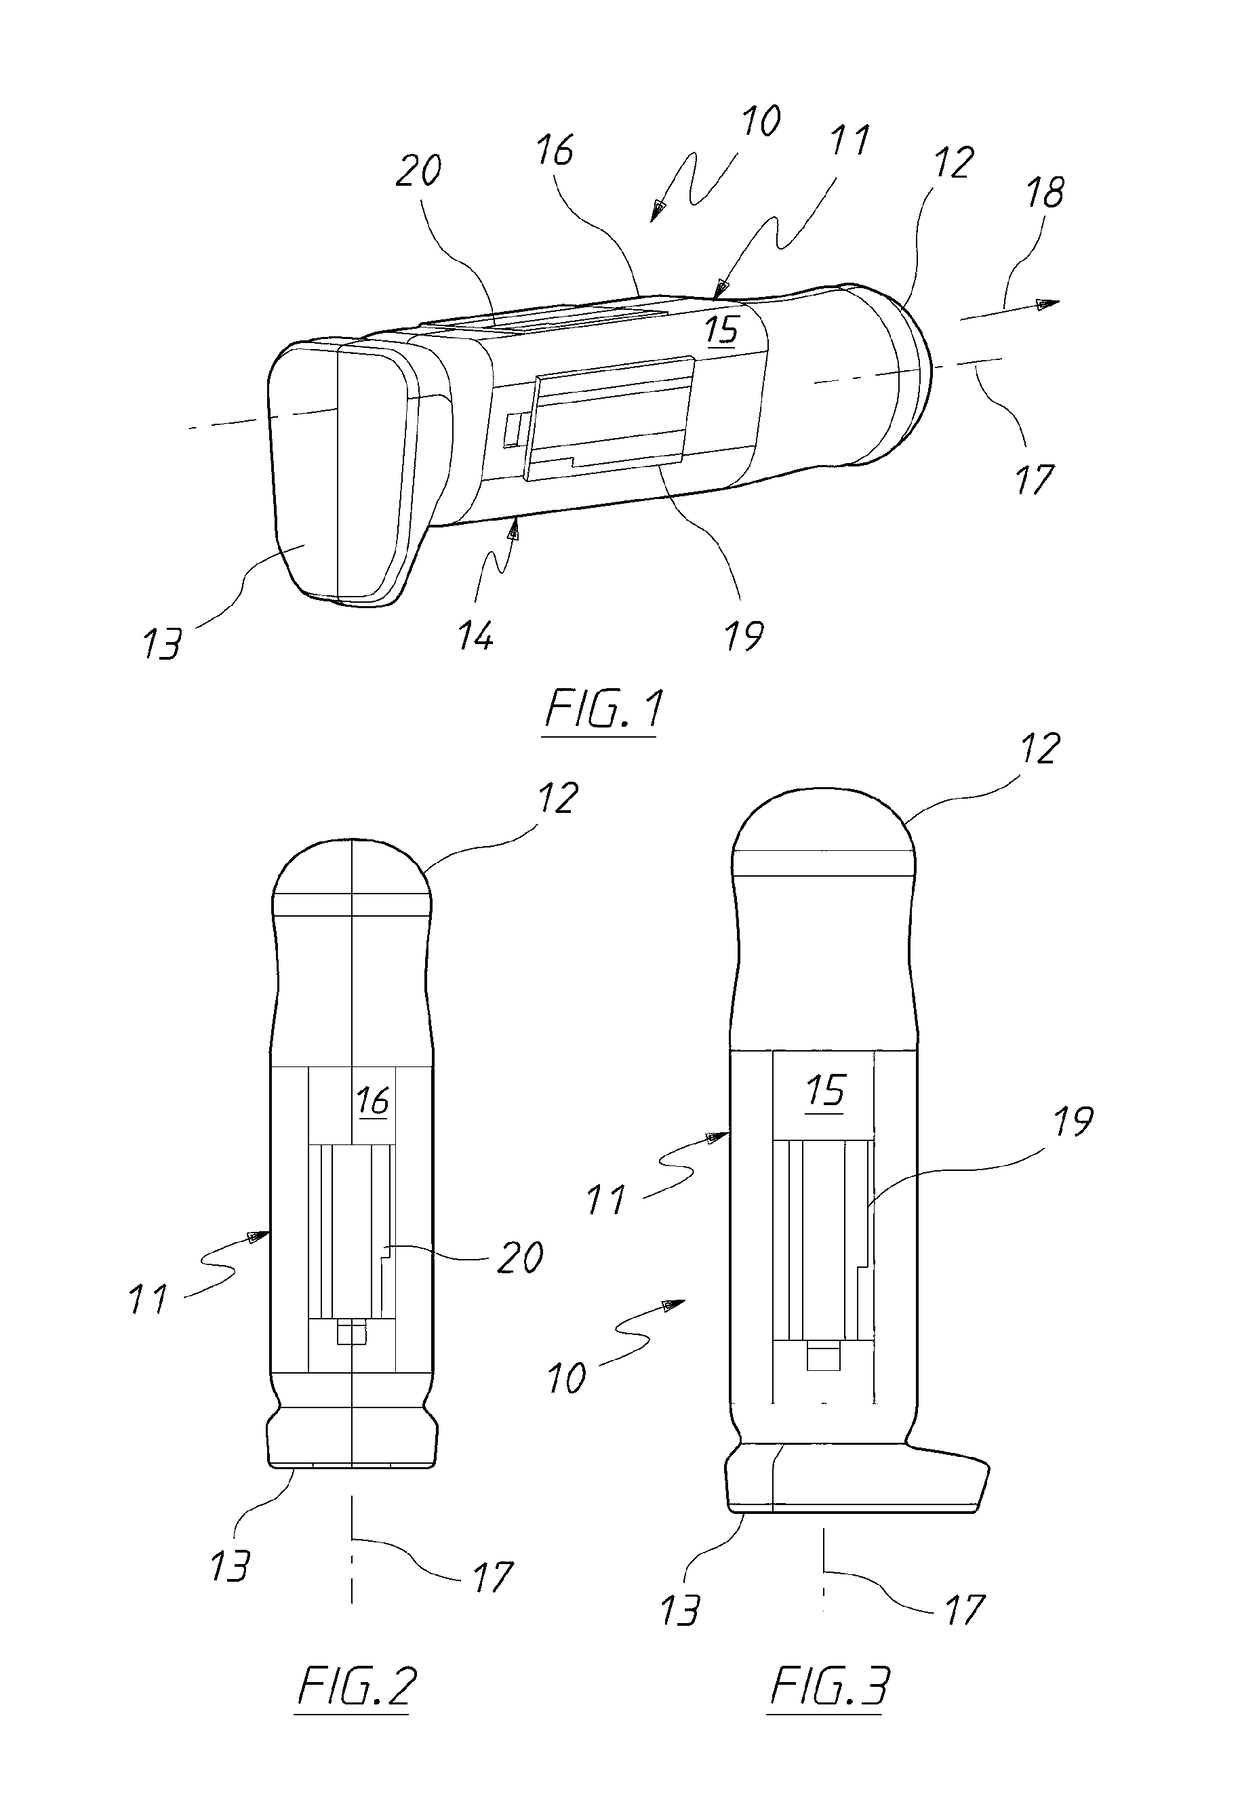 Intra vaginal device to aid in training and determining muscle strength